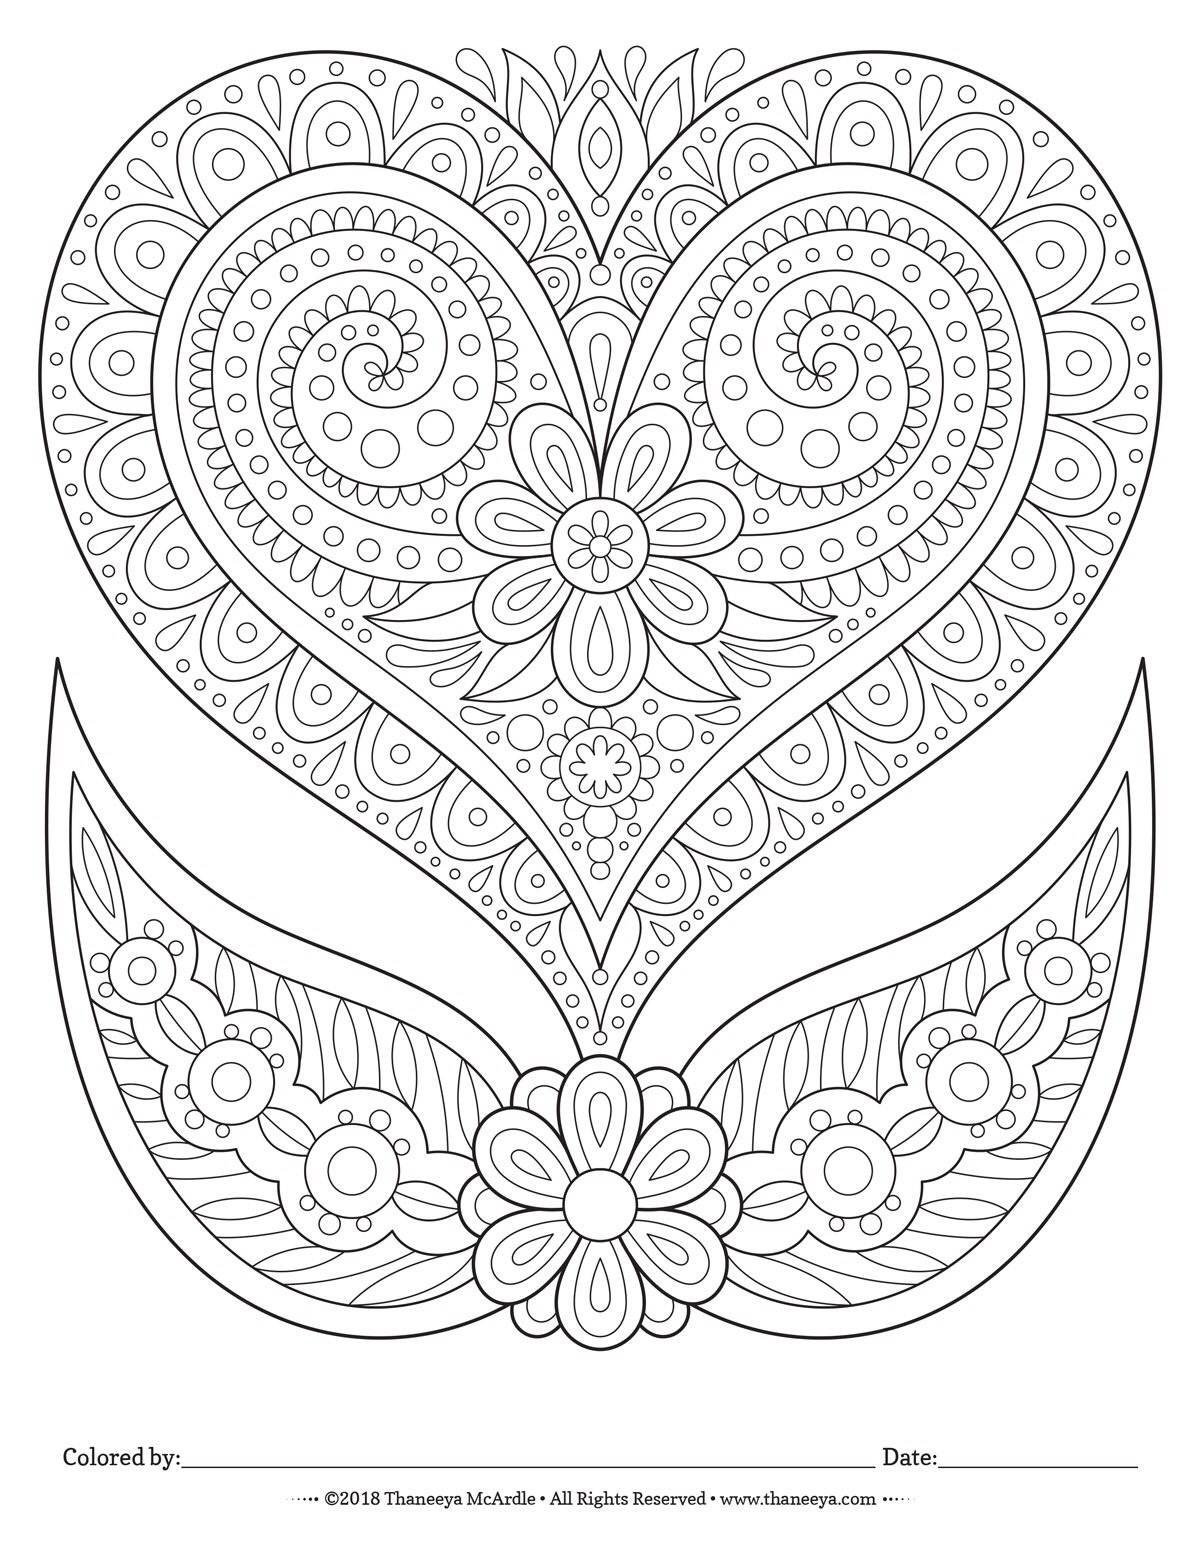 Convert Pictures To Coloring Pages Coloring Pages And Books Coloring Pages And Books Tos Water